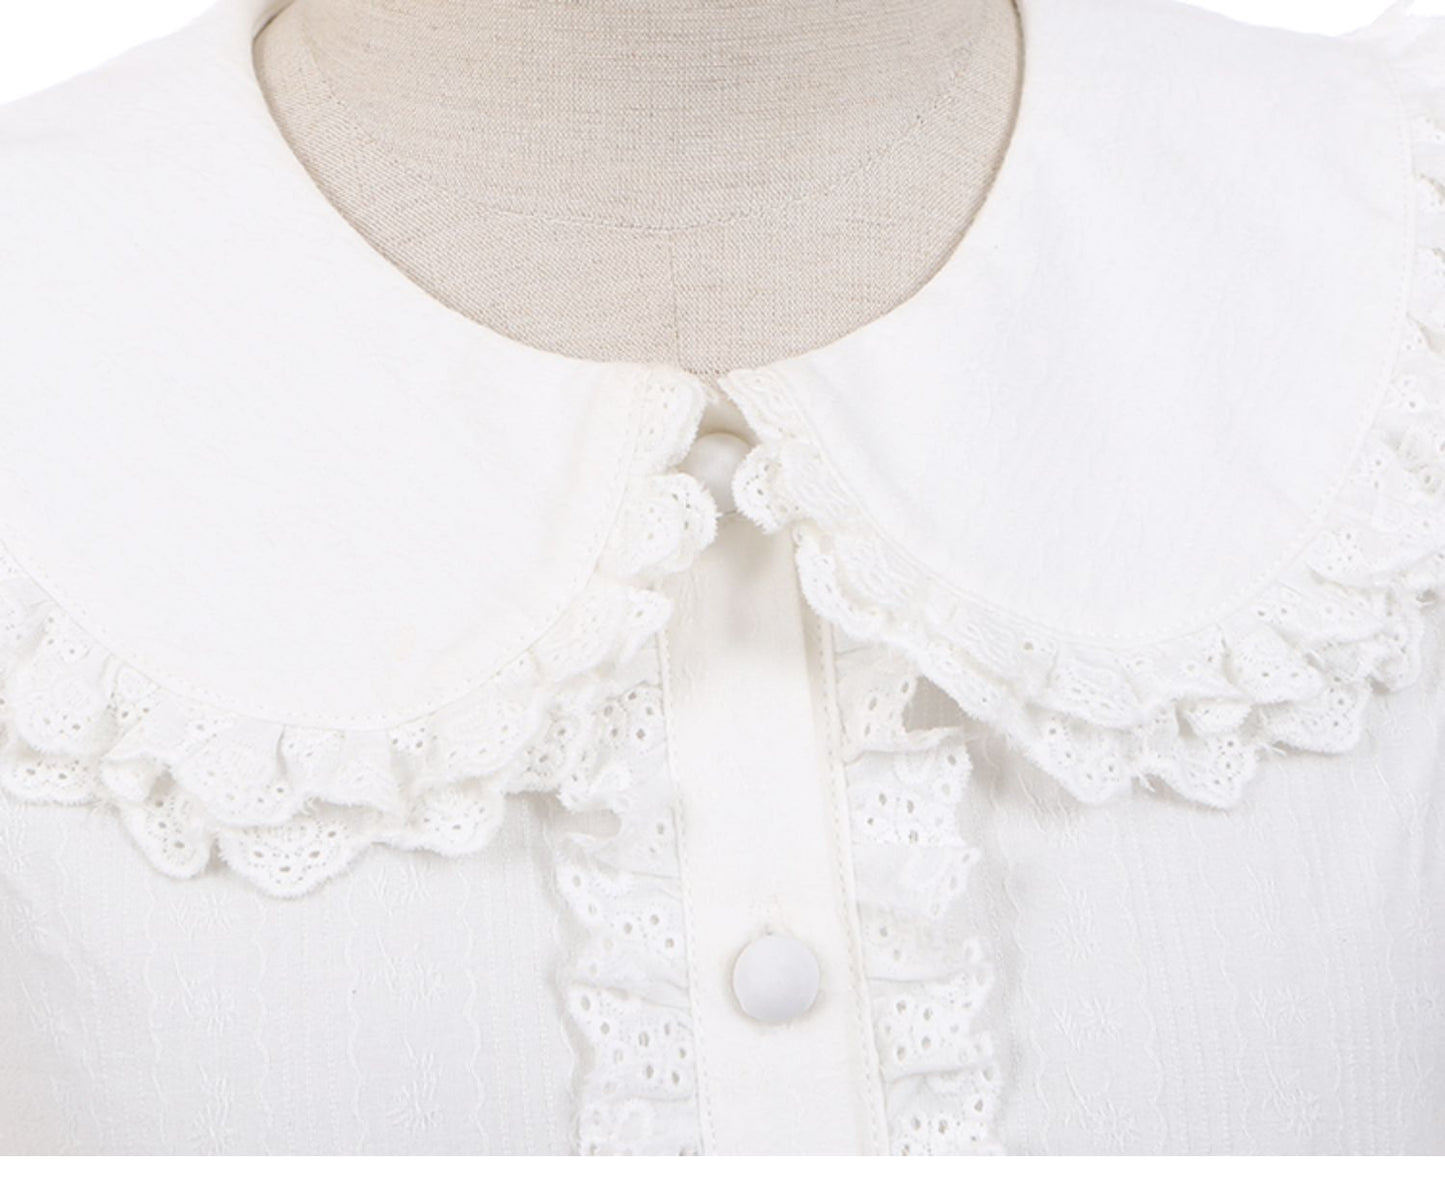 Model Sample: To Alice Sweet Cotton Blouse in White